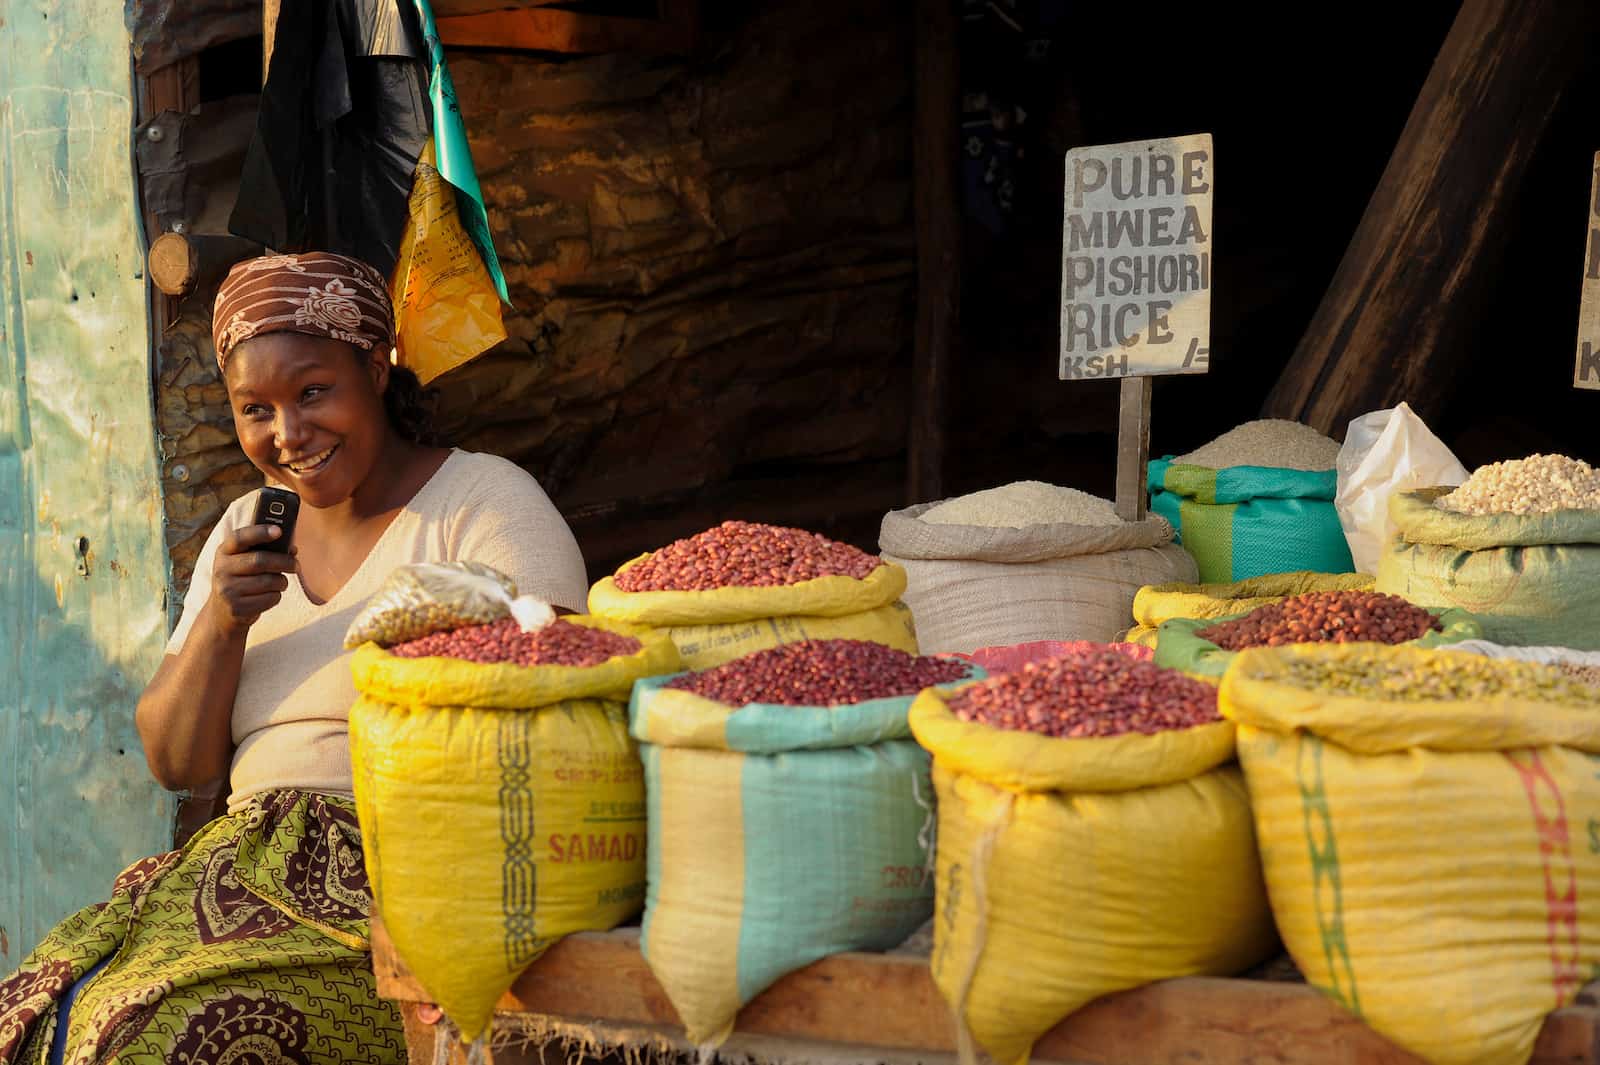 A woman selling beans on a street in Kibera, where some people go for poverty tourism.